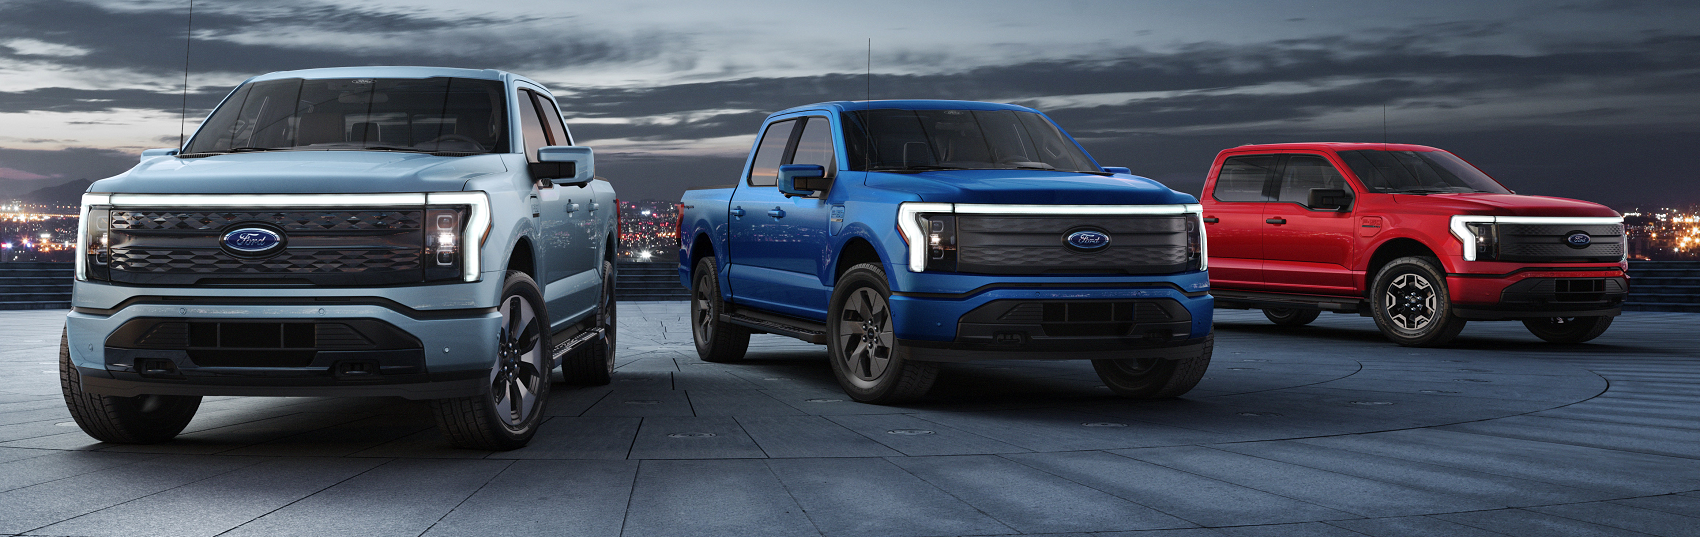 Lineup of Ford F-150 Lightning models